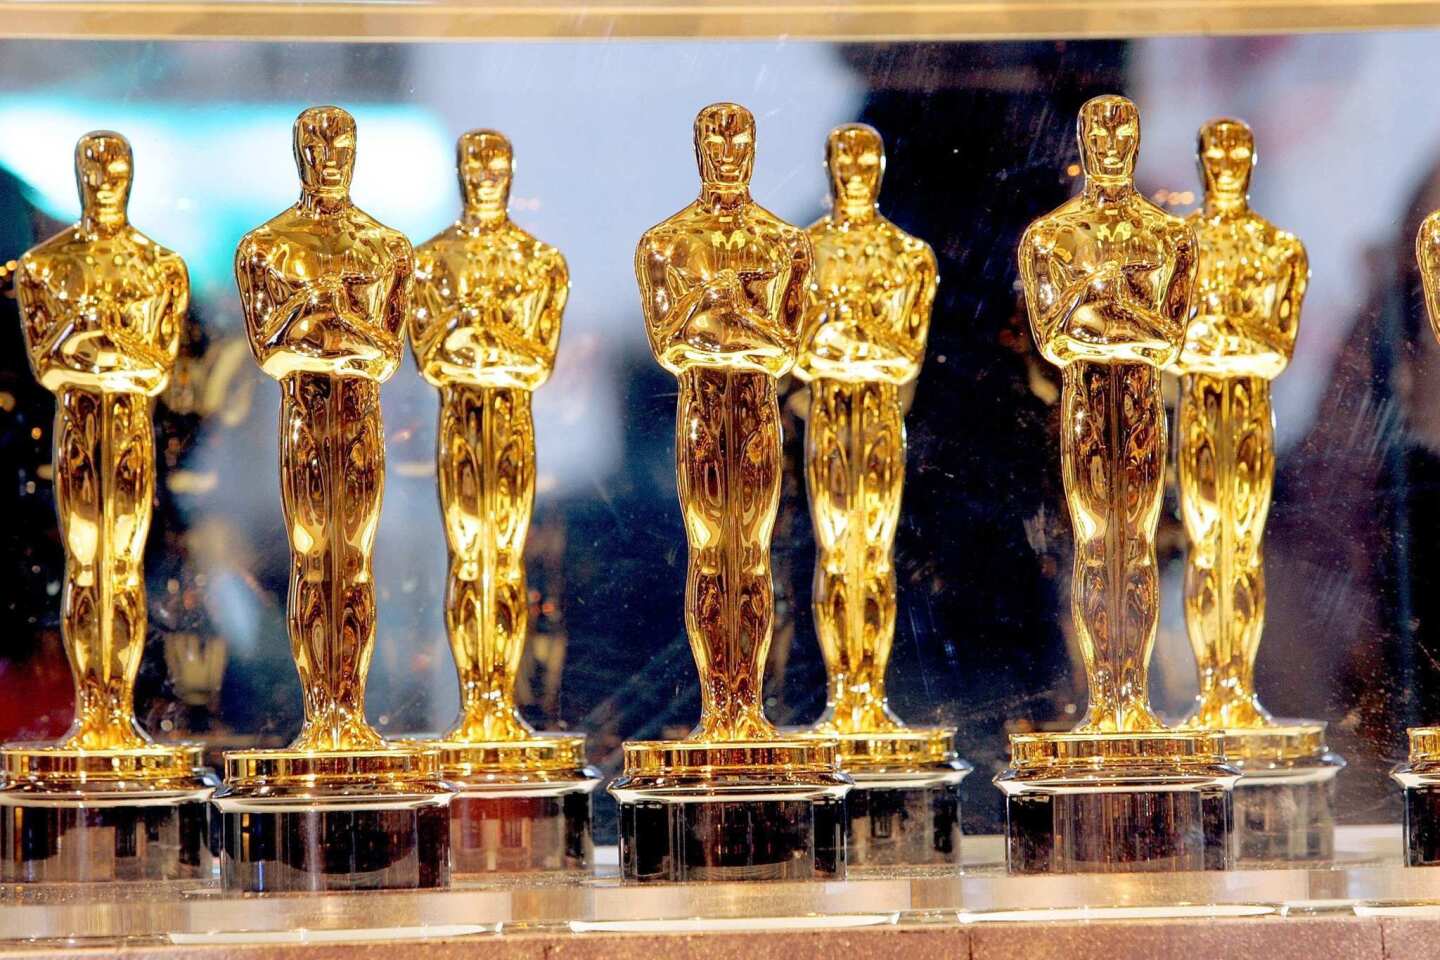 With award season well underway and Oscar nominations around the corner, we all know where this season's big award players will be for the next couple of months: They'll be donning tuxes and dresses and walking endless red carpets, listening to countless speeches and practicing their best "good for them" smiles. But where can we see them on-screen again? With actors such as George Clooney and Meryl Streep, and directors Steven Spielberg and Martin Scorsese, and more, here's what some notable award season hopefuls have on their itinerary for 2012 and beyond.